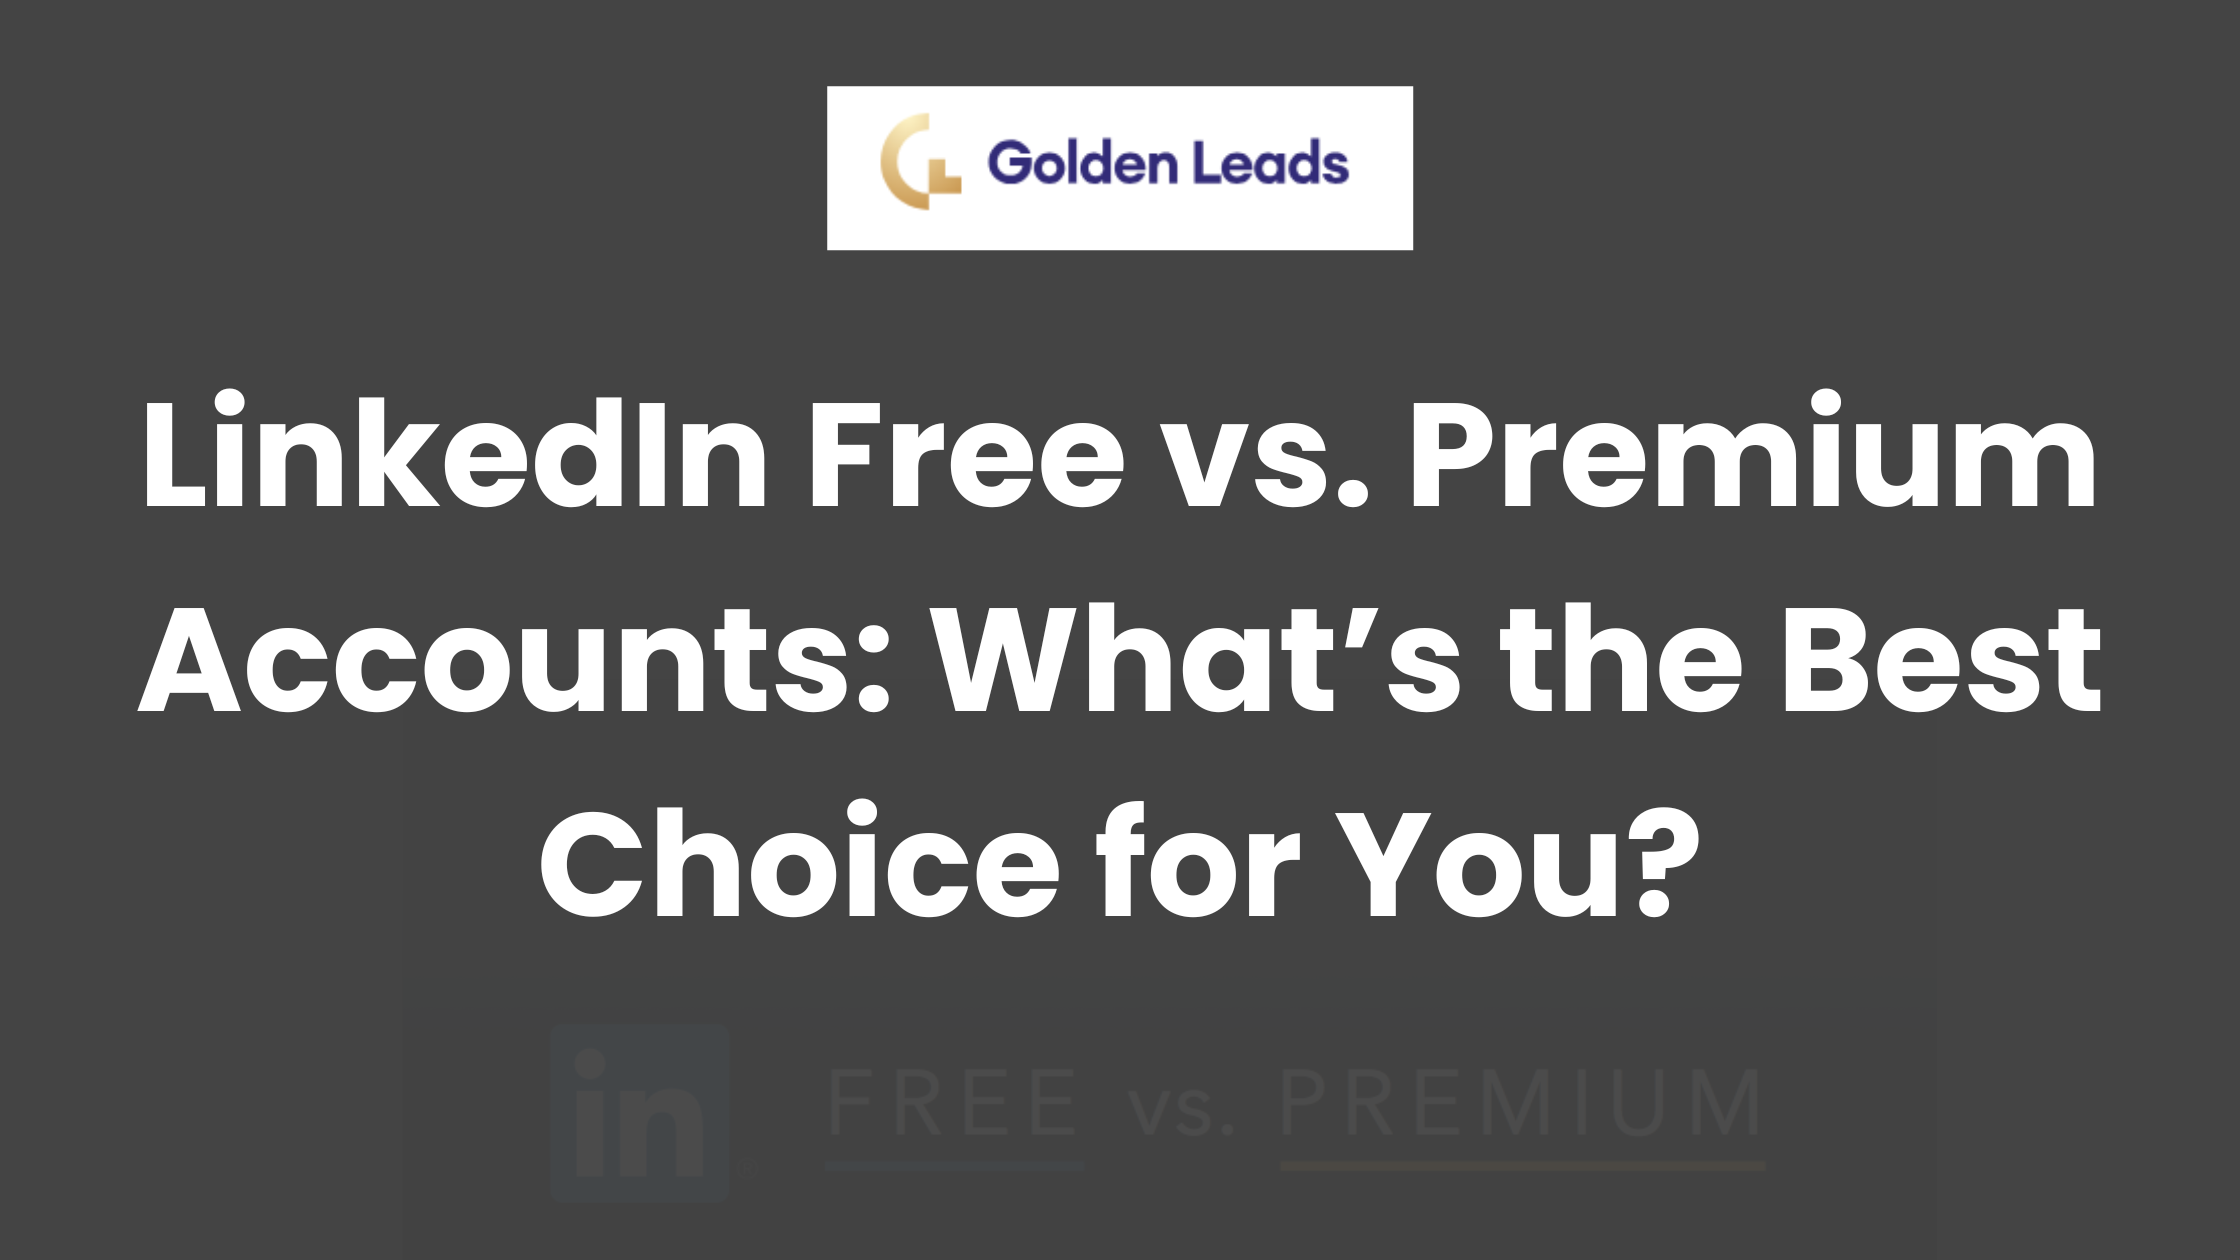 LinkedIn Free vs Premium Accounts Whats the Best Choice for You